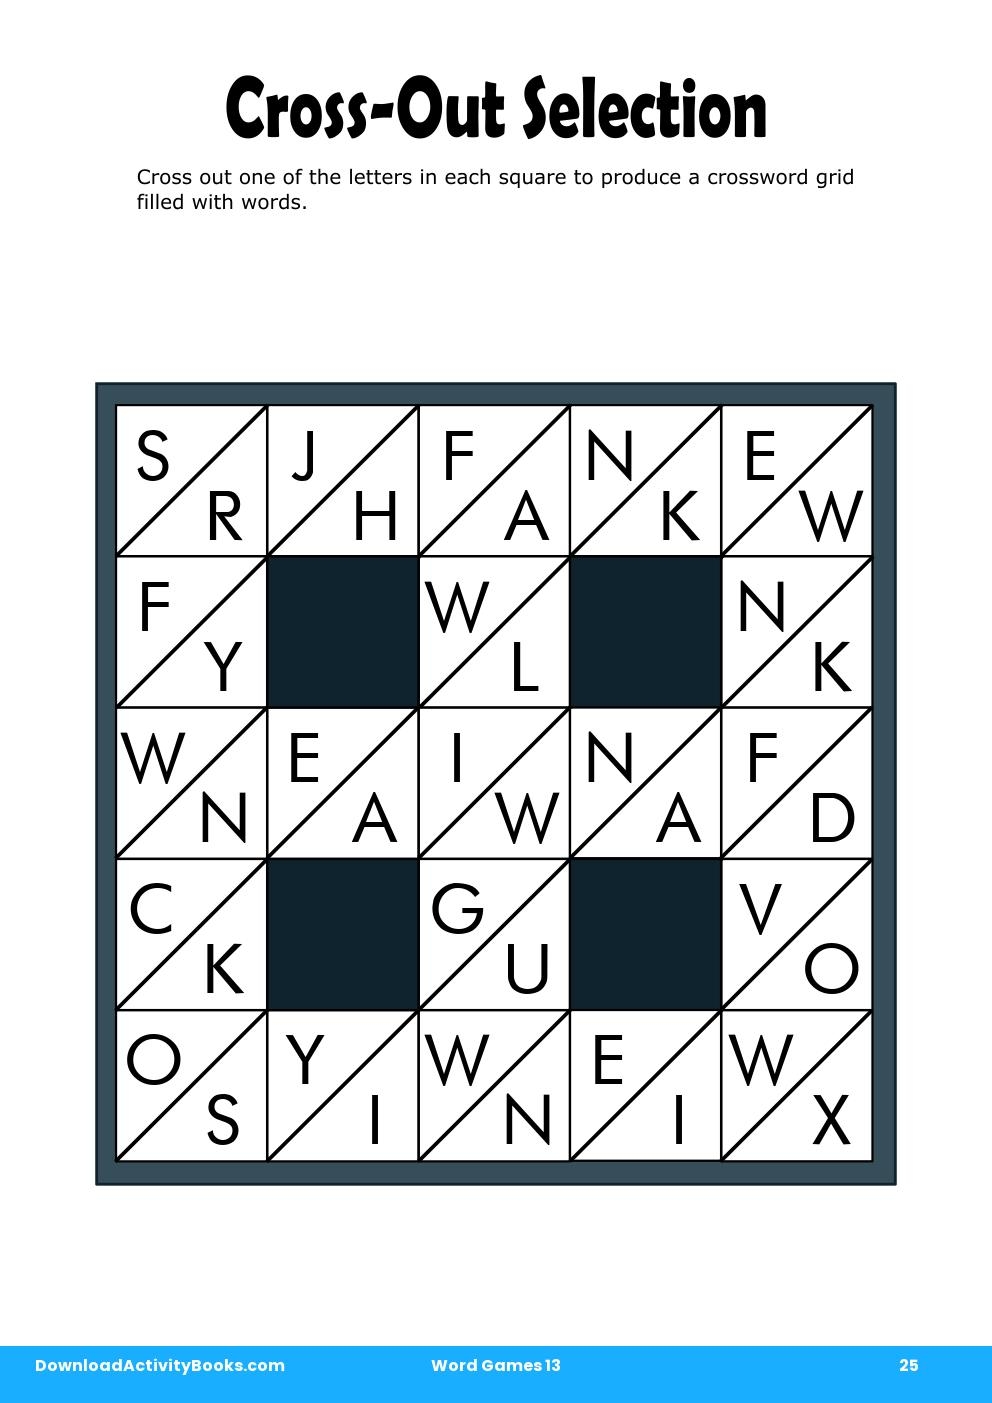 Cross-Out Selection in Word Games 13